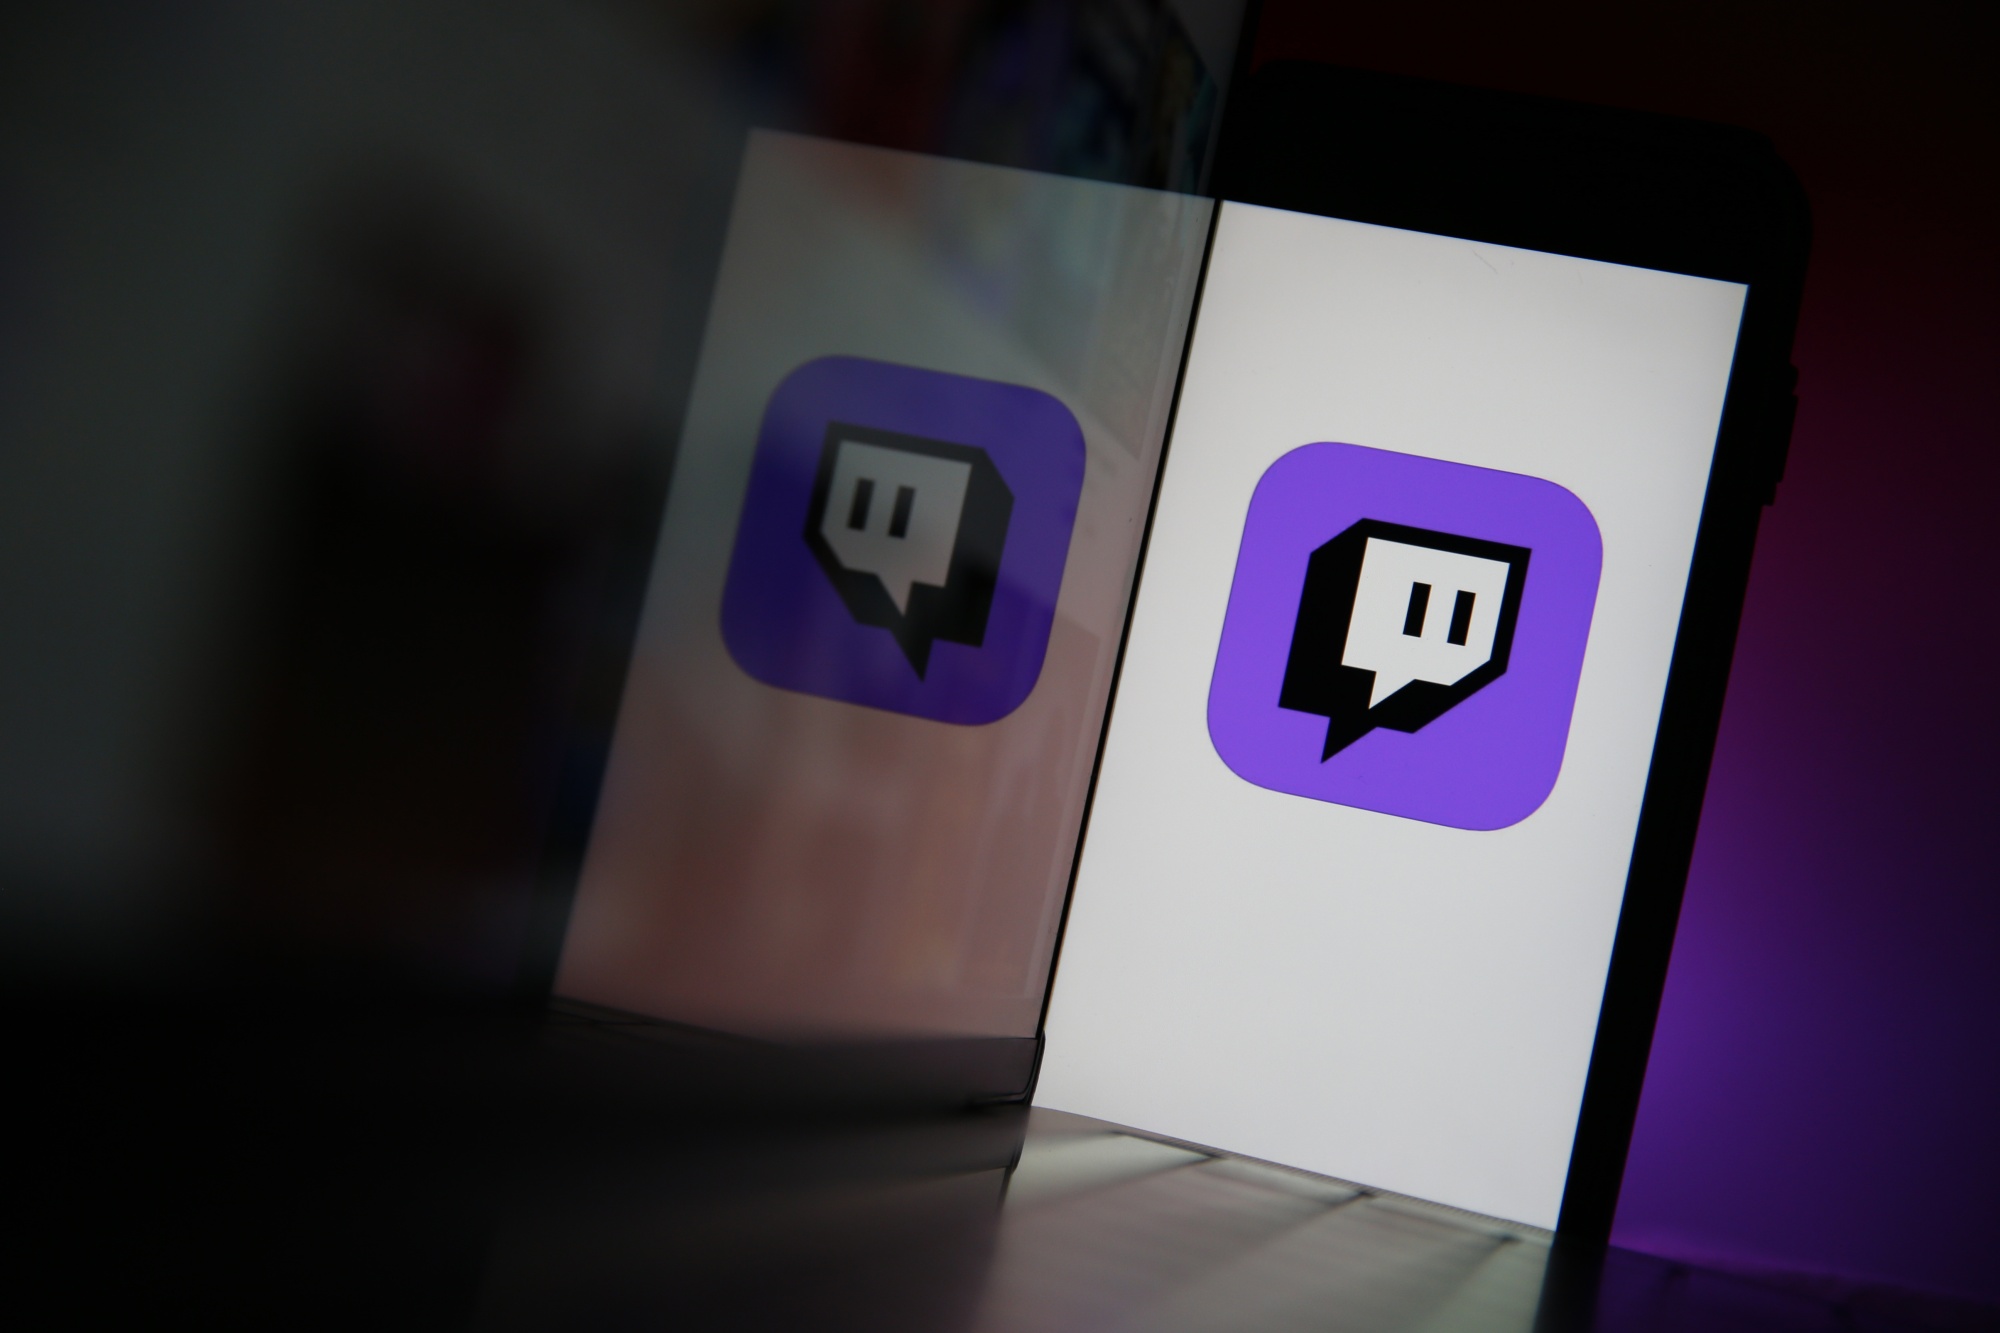 Going Live With Twitch Content Creators – Advertising Week